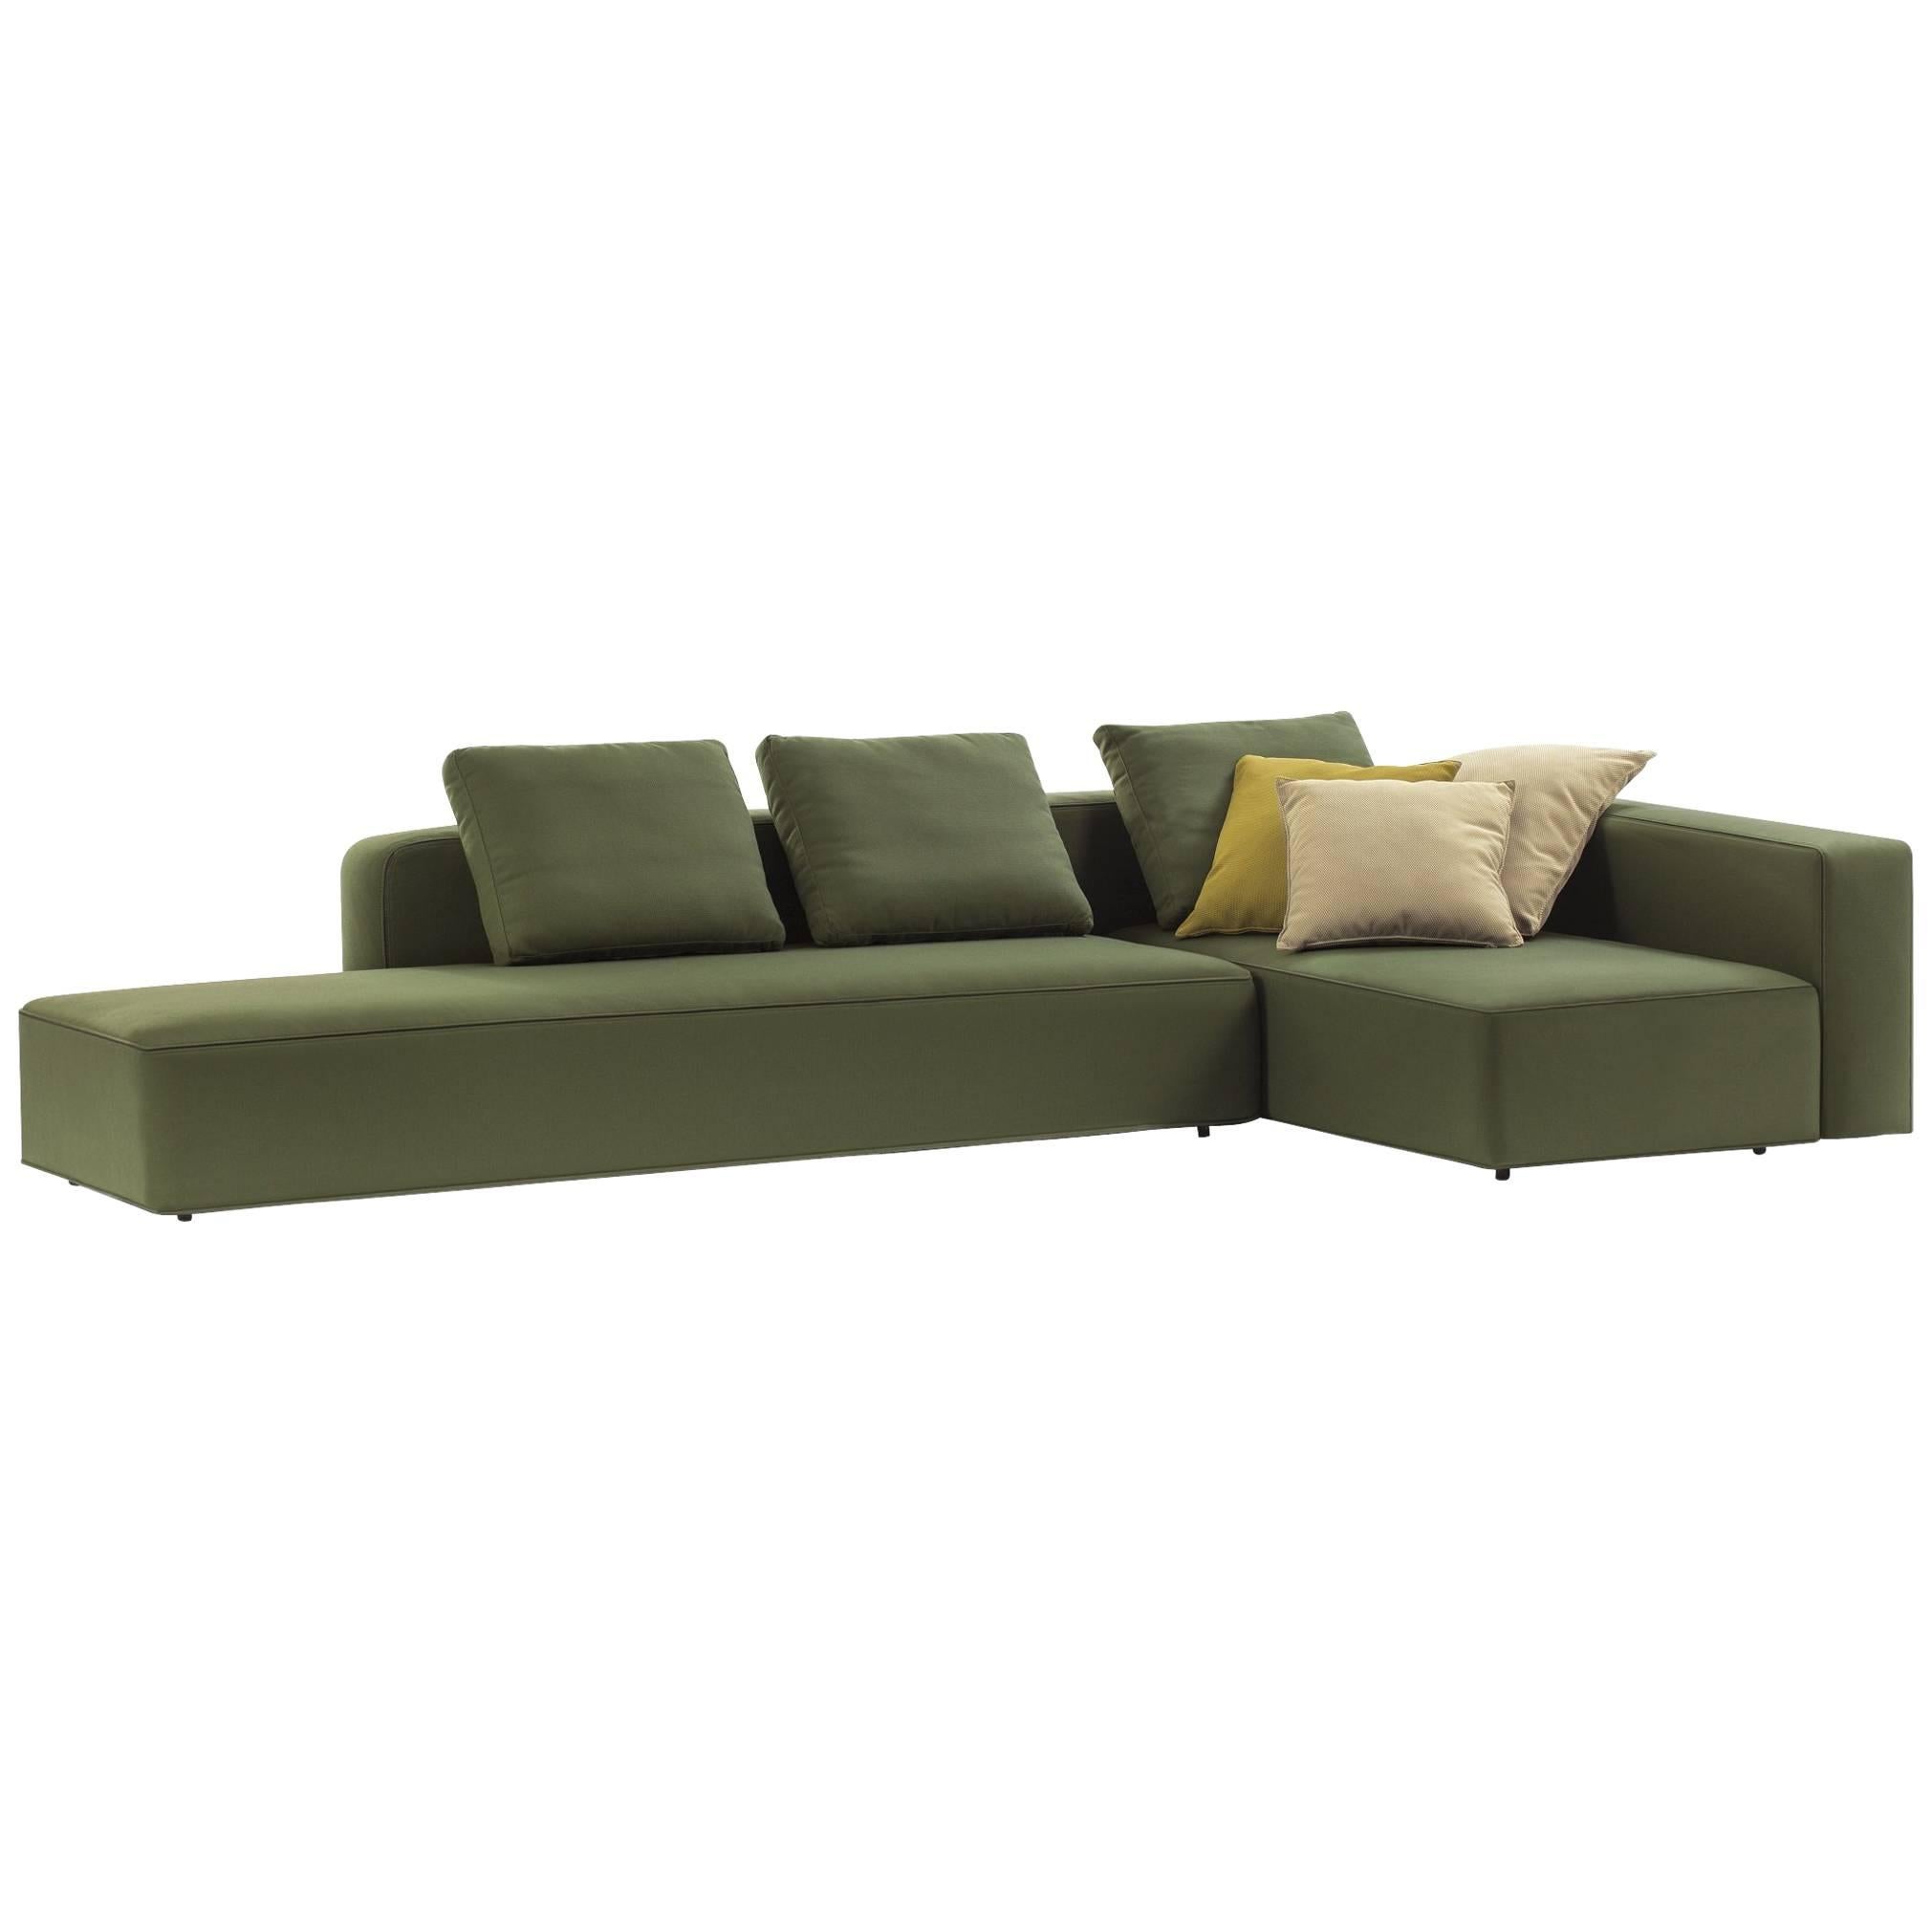 Roda Dandy Indoor/Outdoor Sectional in Panama X03 Lime Upholstery For Sale